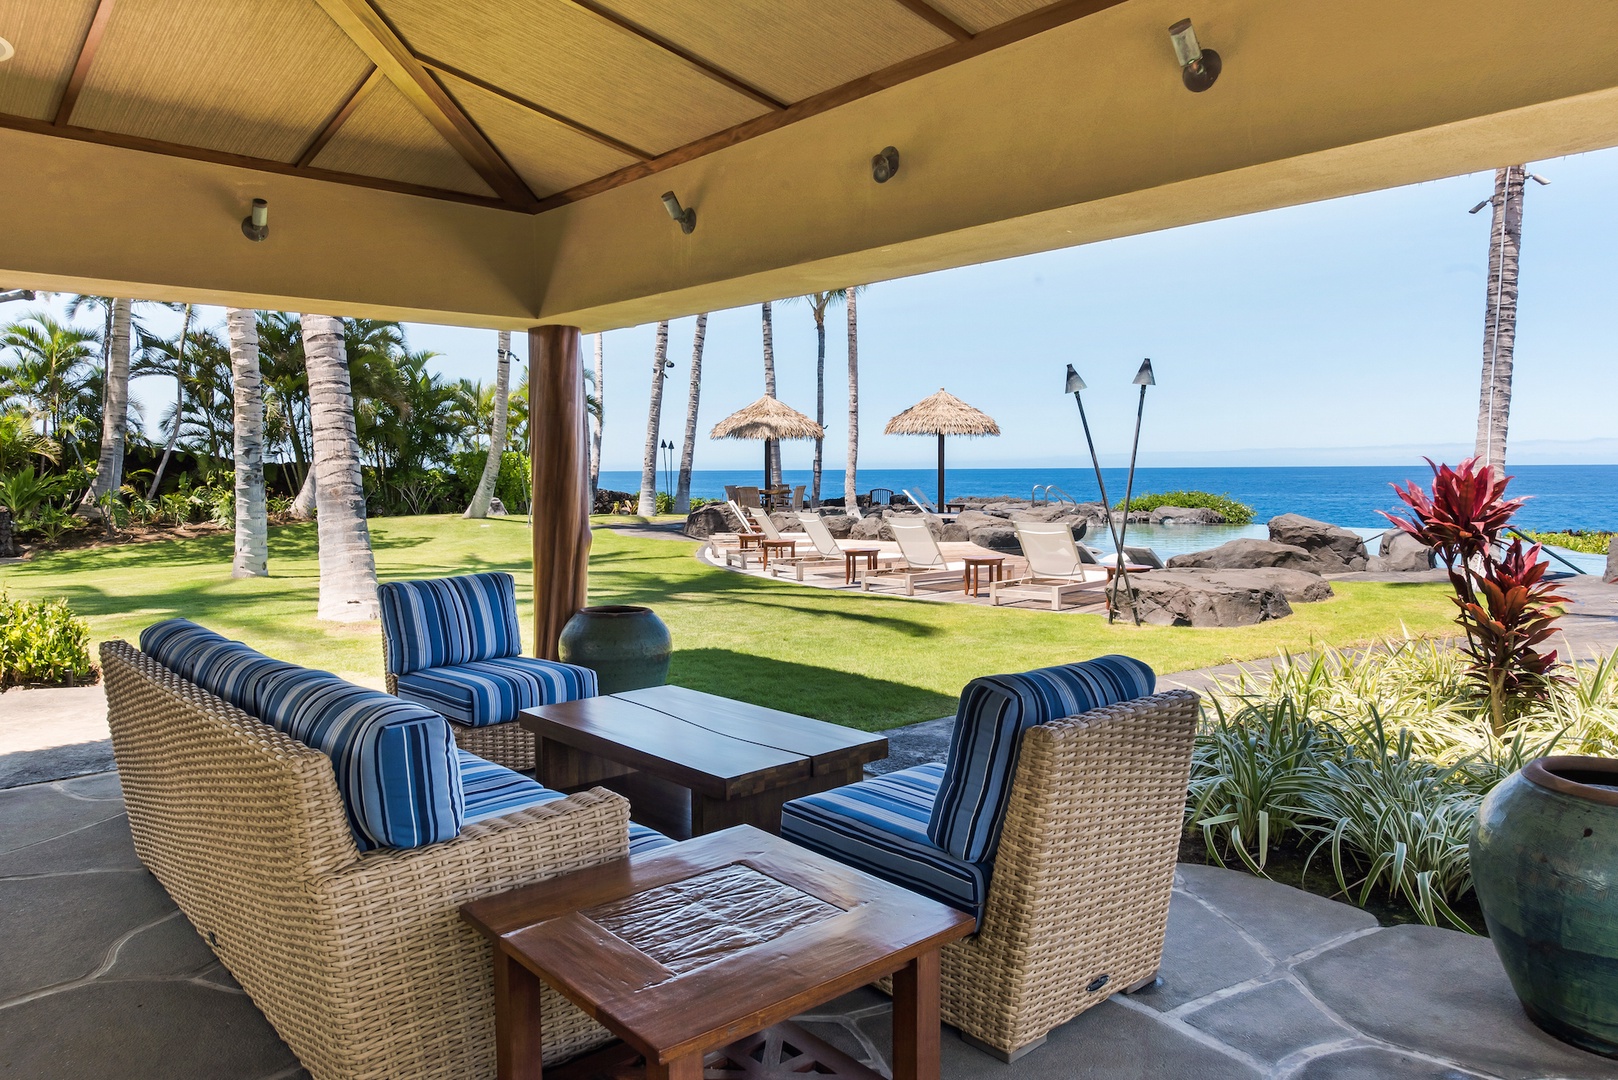 Kamuela Vacation Rentals, 3BD OneOcean (1C) at Mauna Lani Resort - The Grotto Amenity Center w/ Plenty of Shady Places to Lounge and Soak Up the Stunning Ocean Views